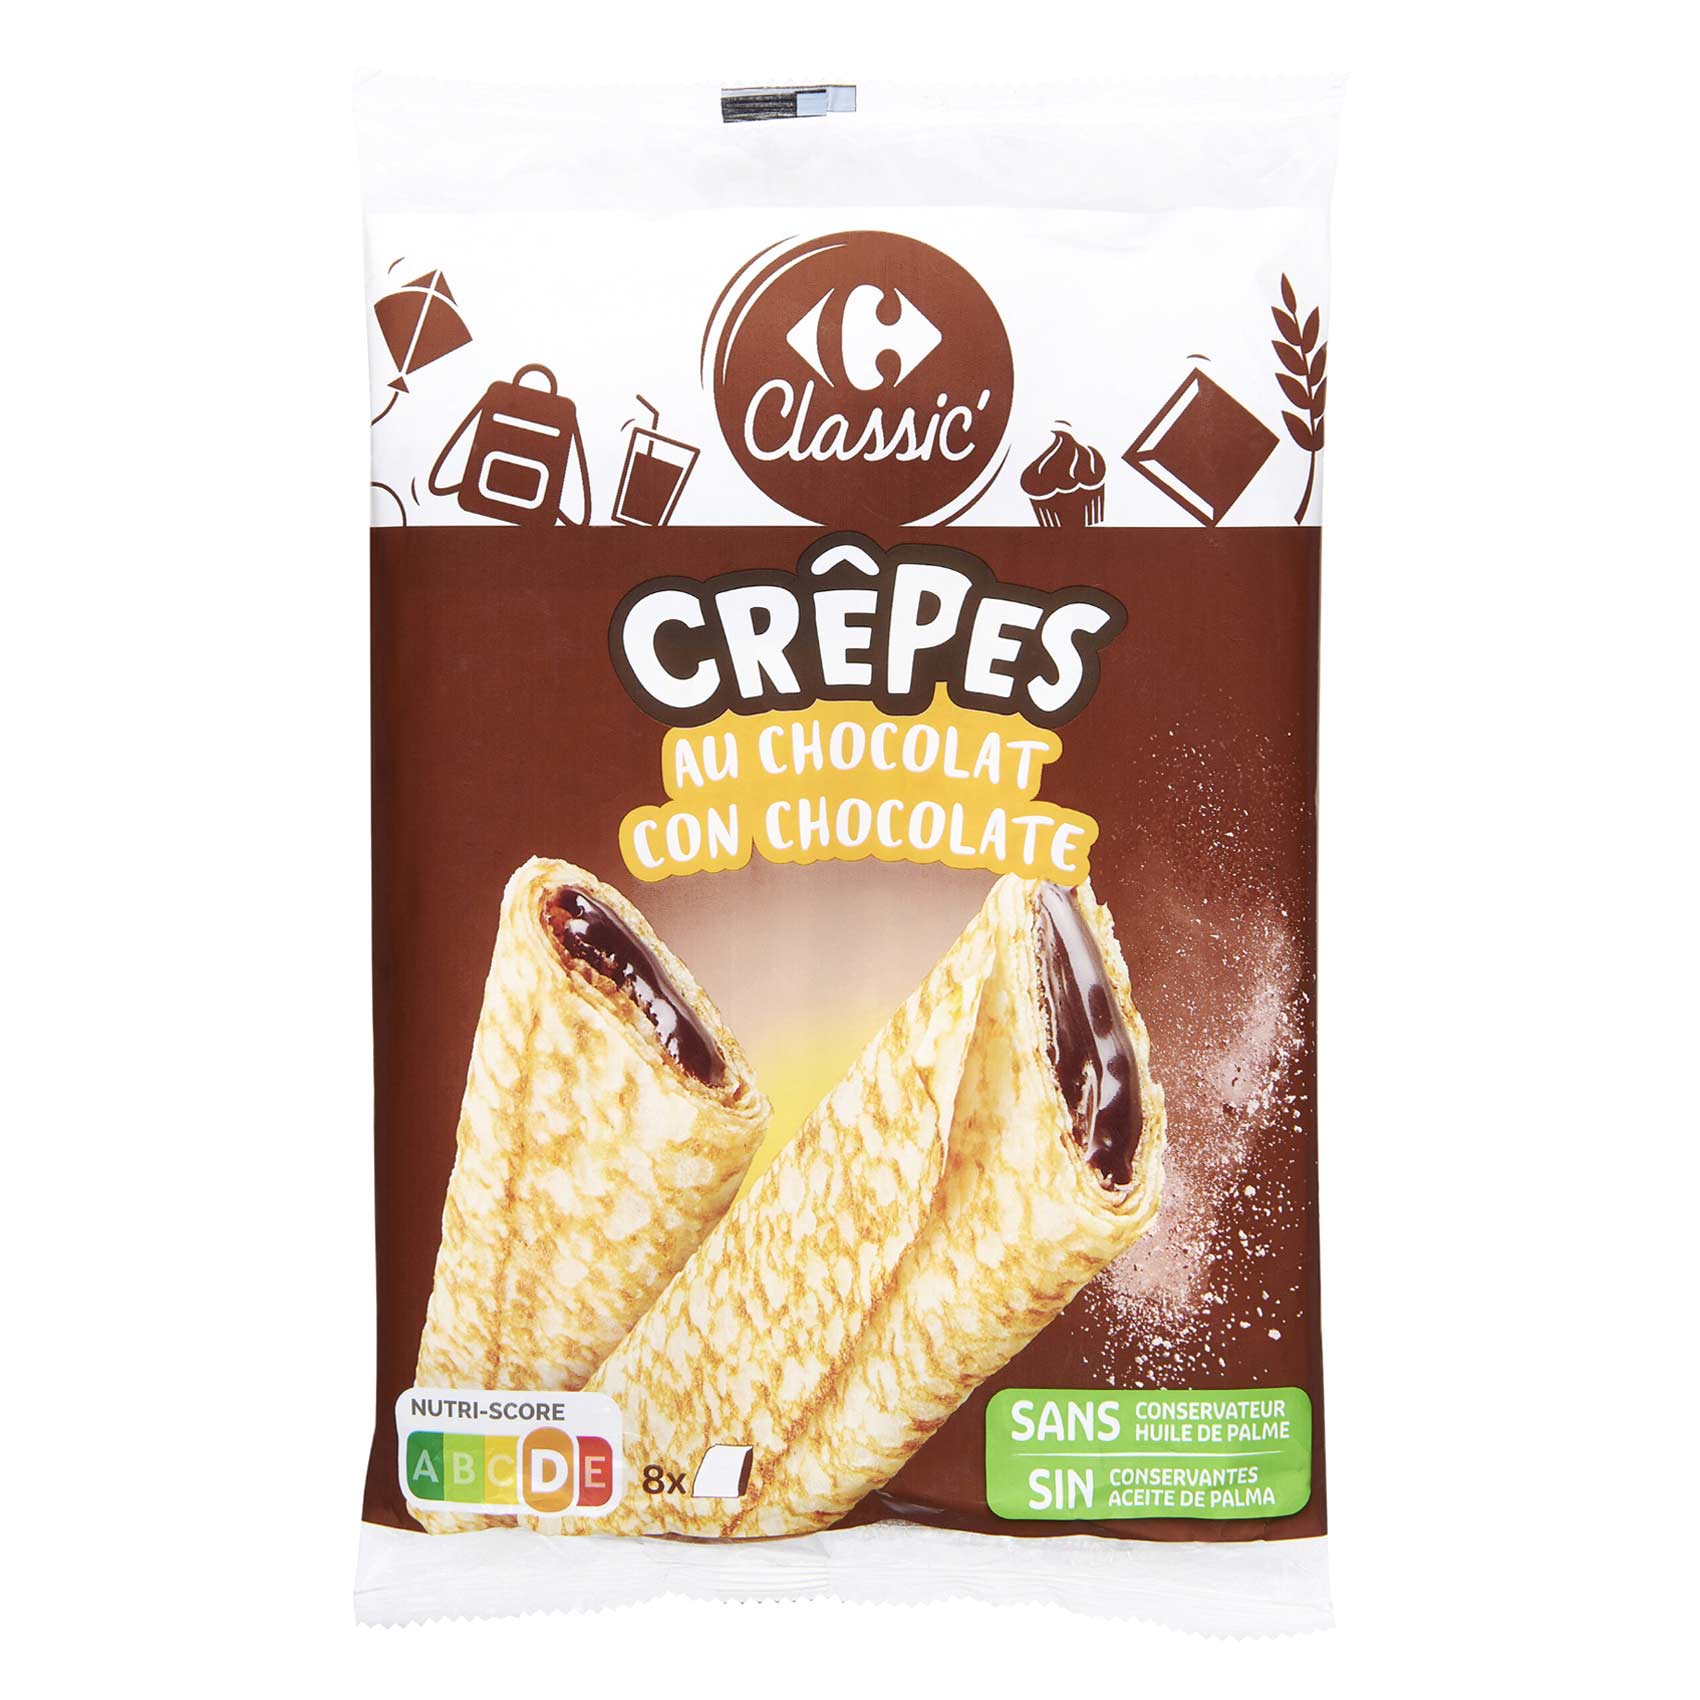 Carrefour Classic Crepes Chocolate Pancakes 240g x 8Pieces